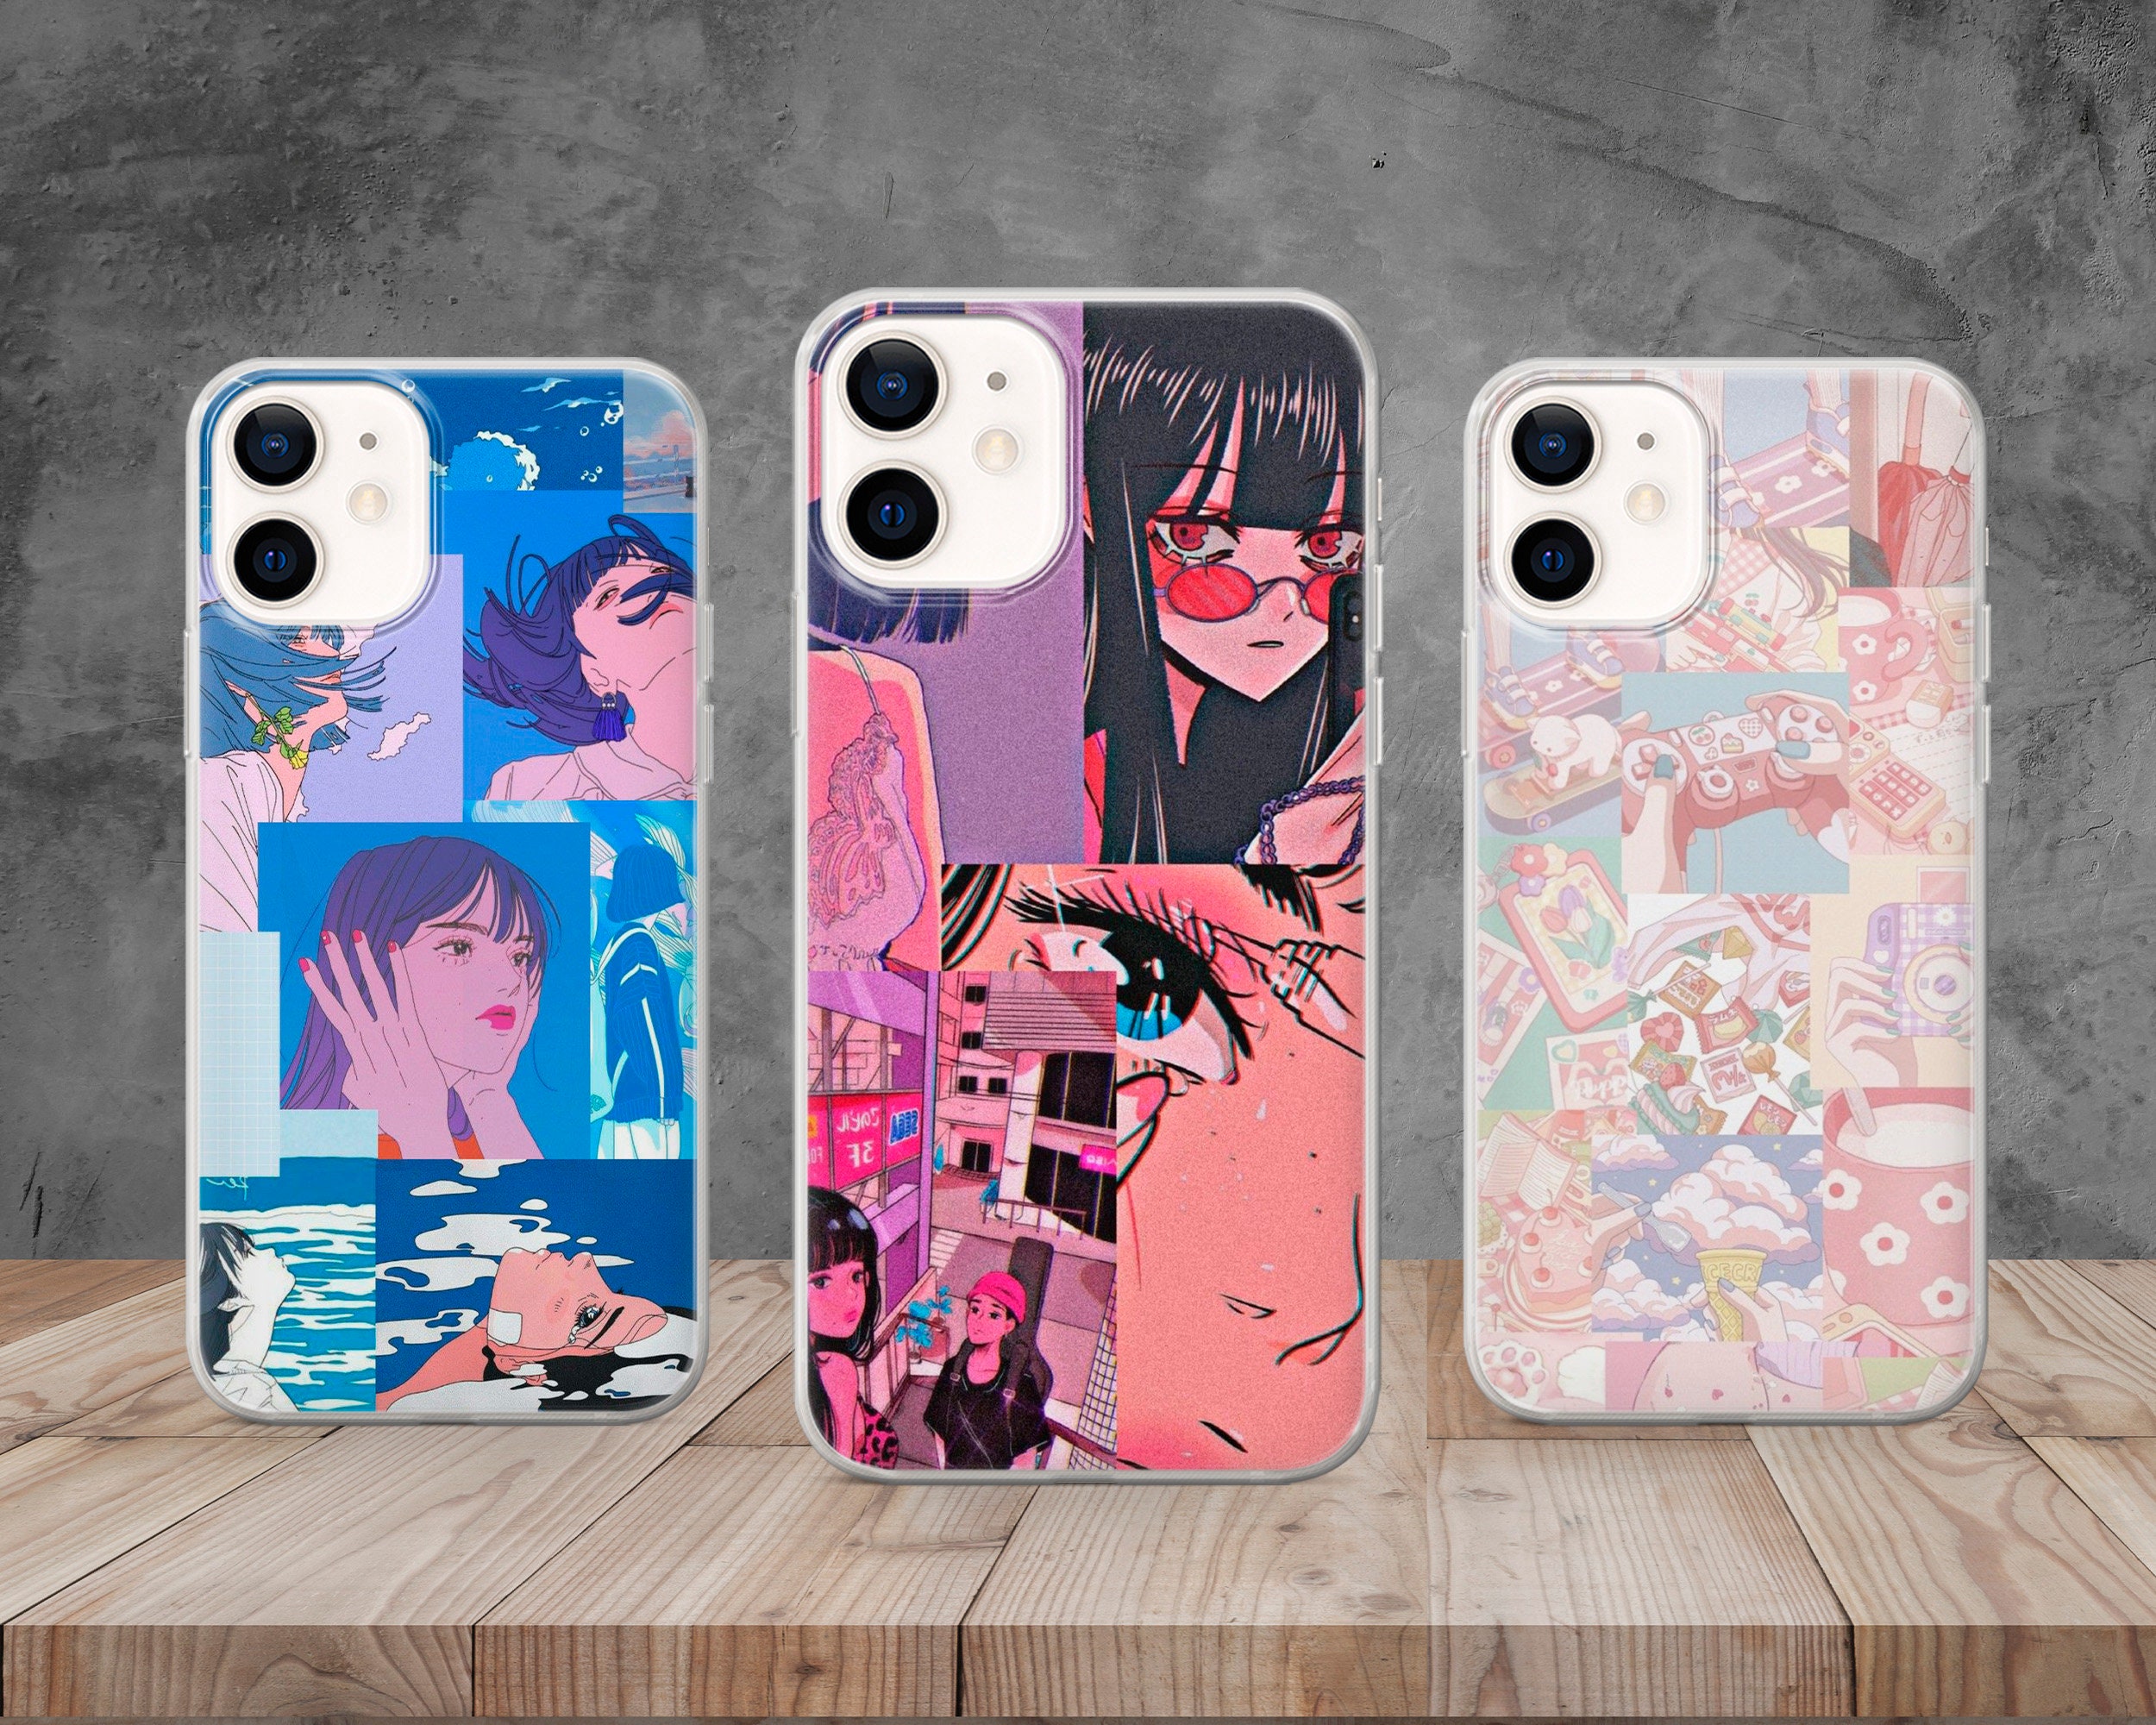 Senpai Vaporwave Aesthetic Anime Girl iPhone 12 Case by The Perfect  Presents  Pixels